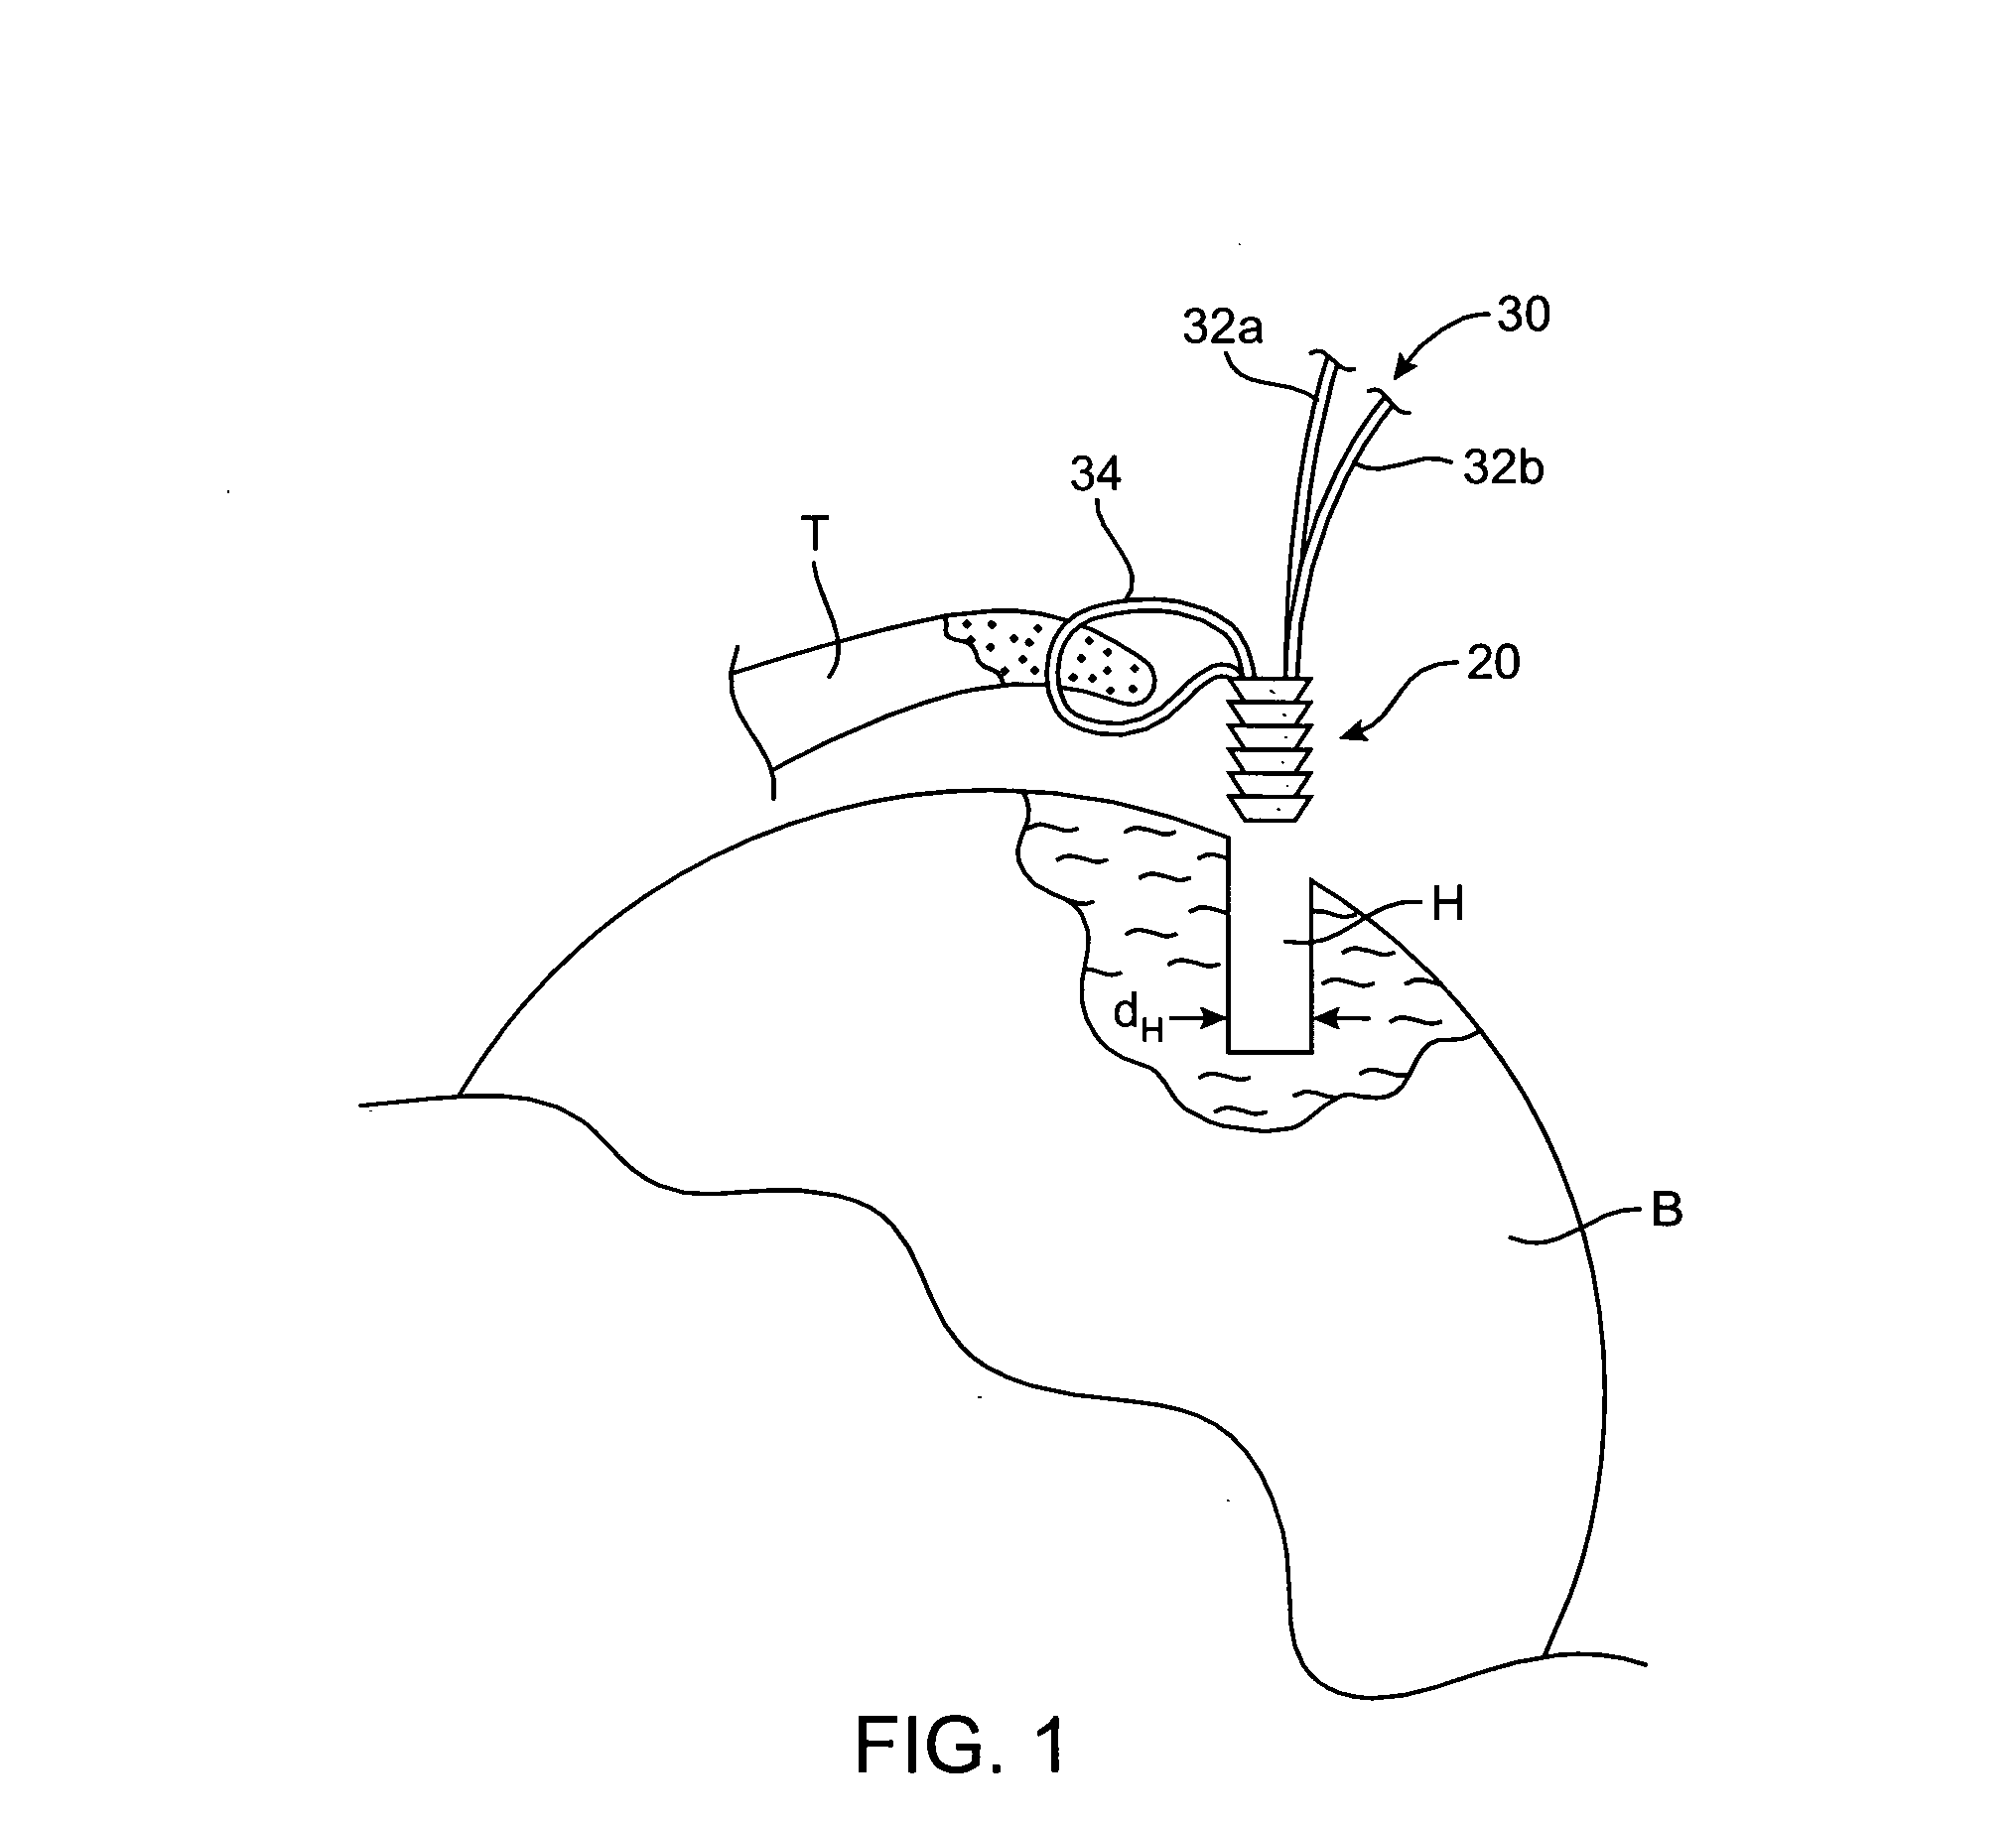 Apparatus and methods for securing tissue to bone